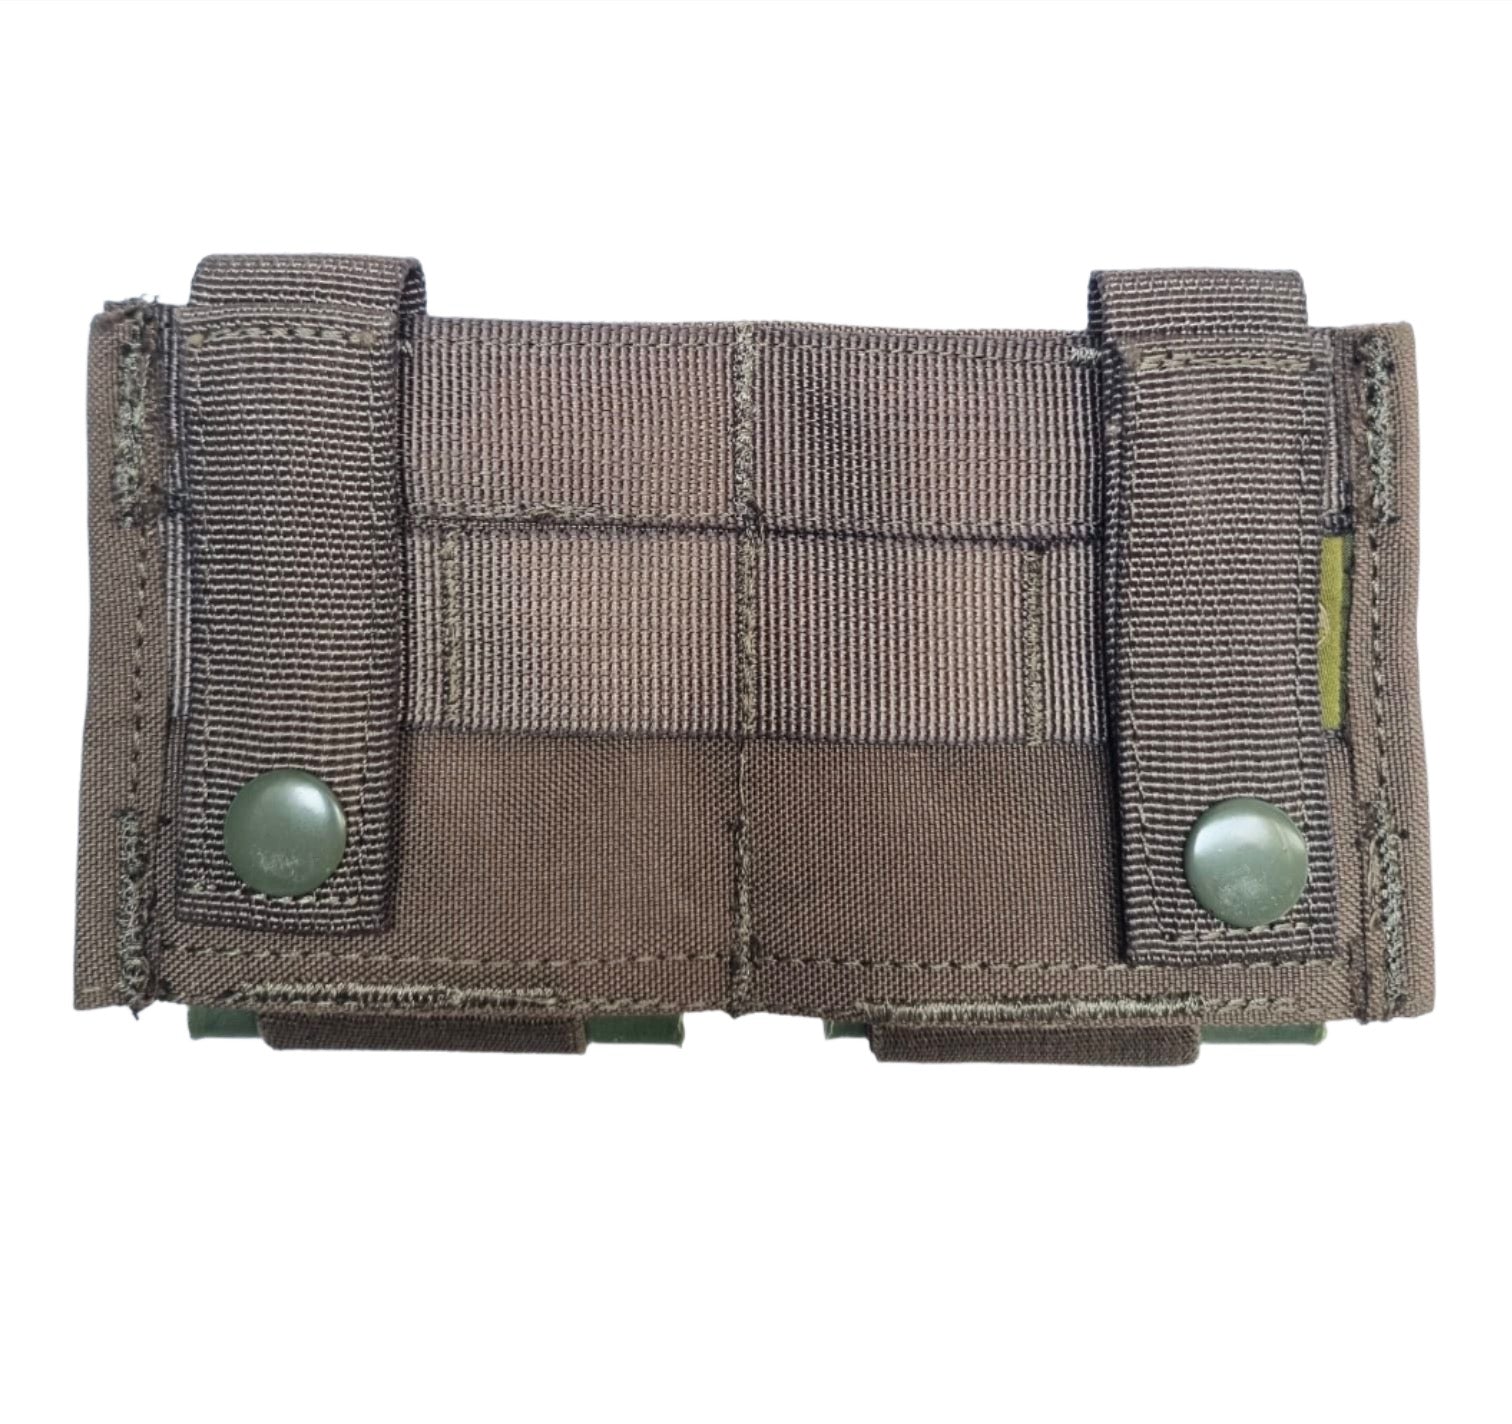 SHE-23032 GRIPTAC DOUBLE M4/M16 MAG POUCH ARMY GREEN